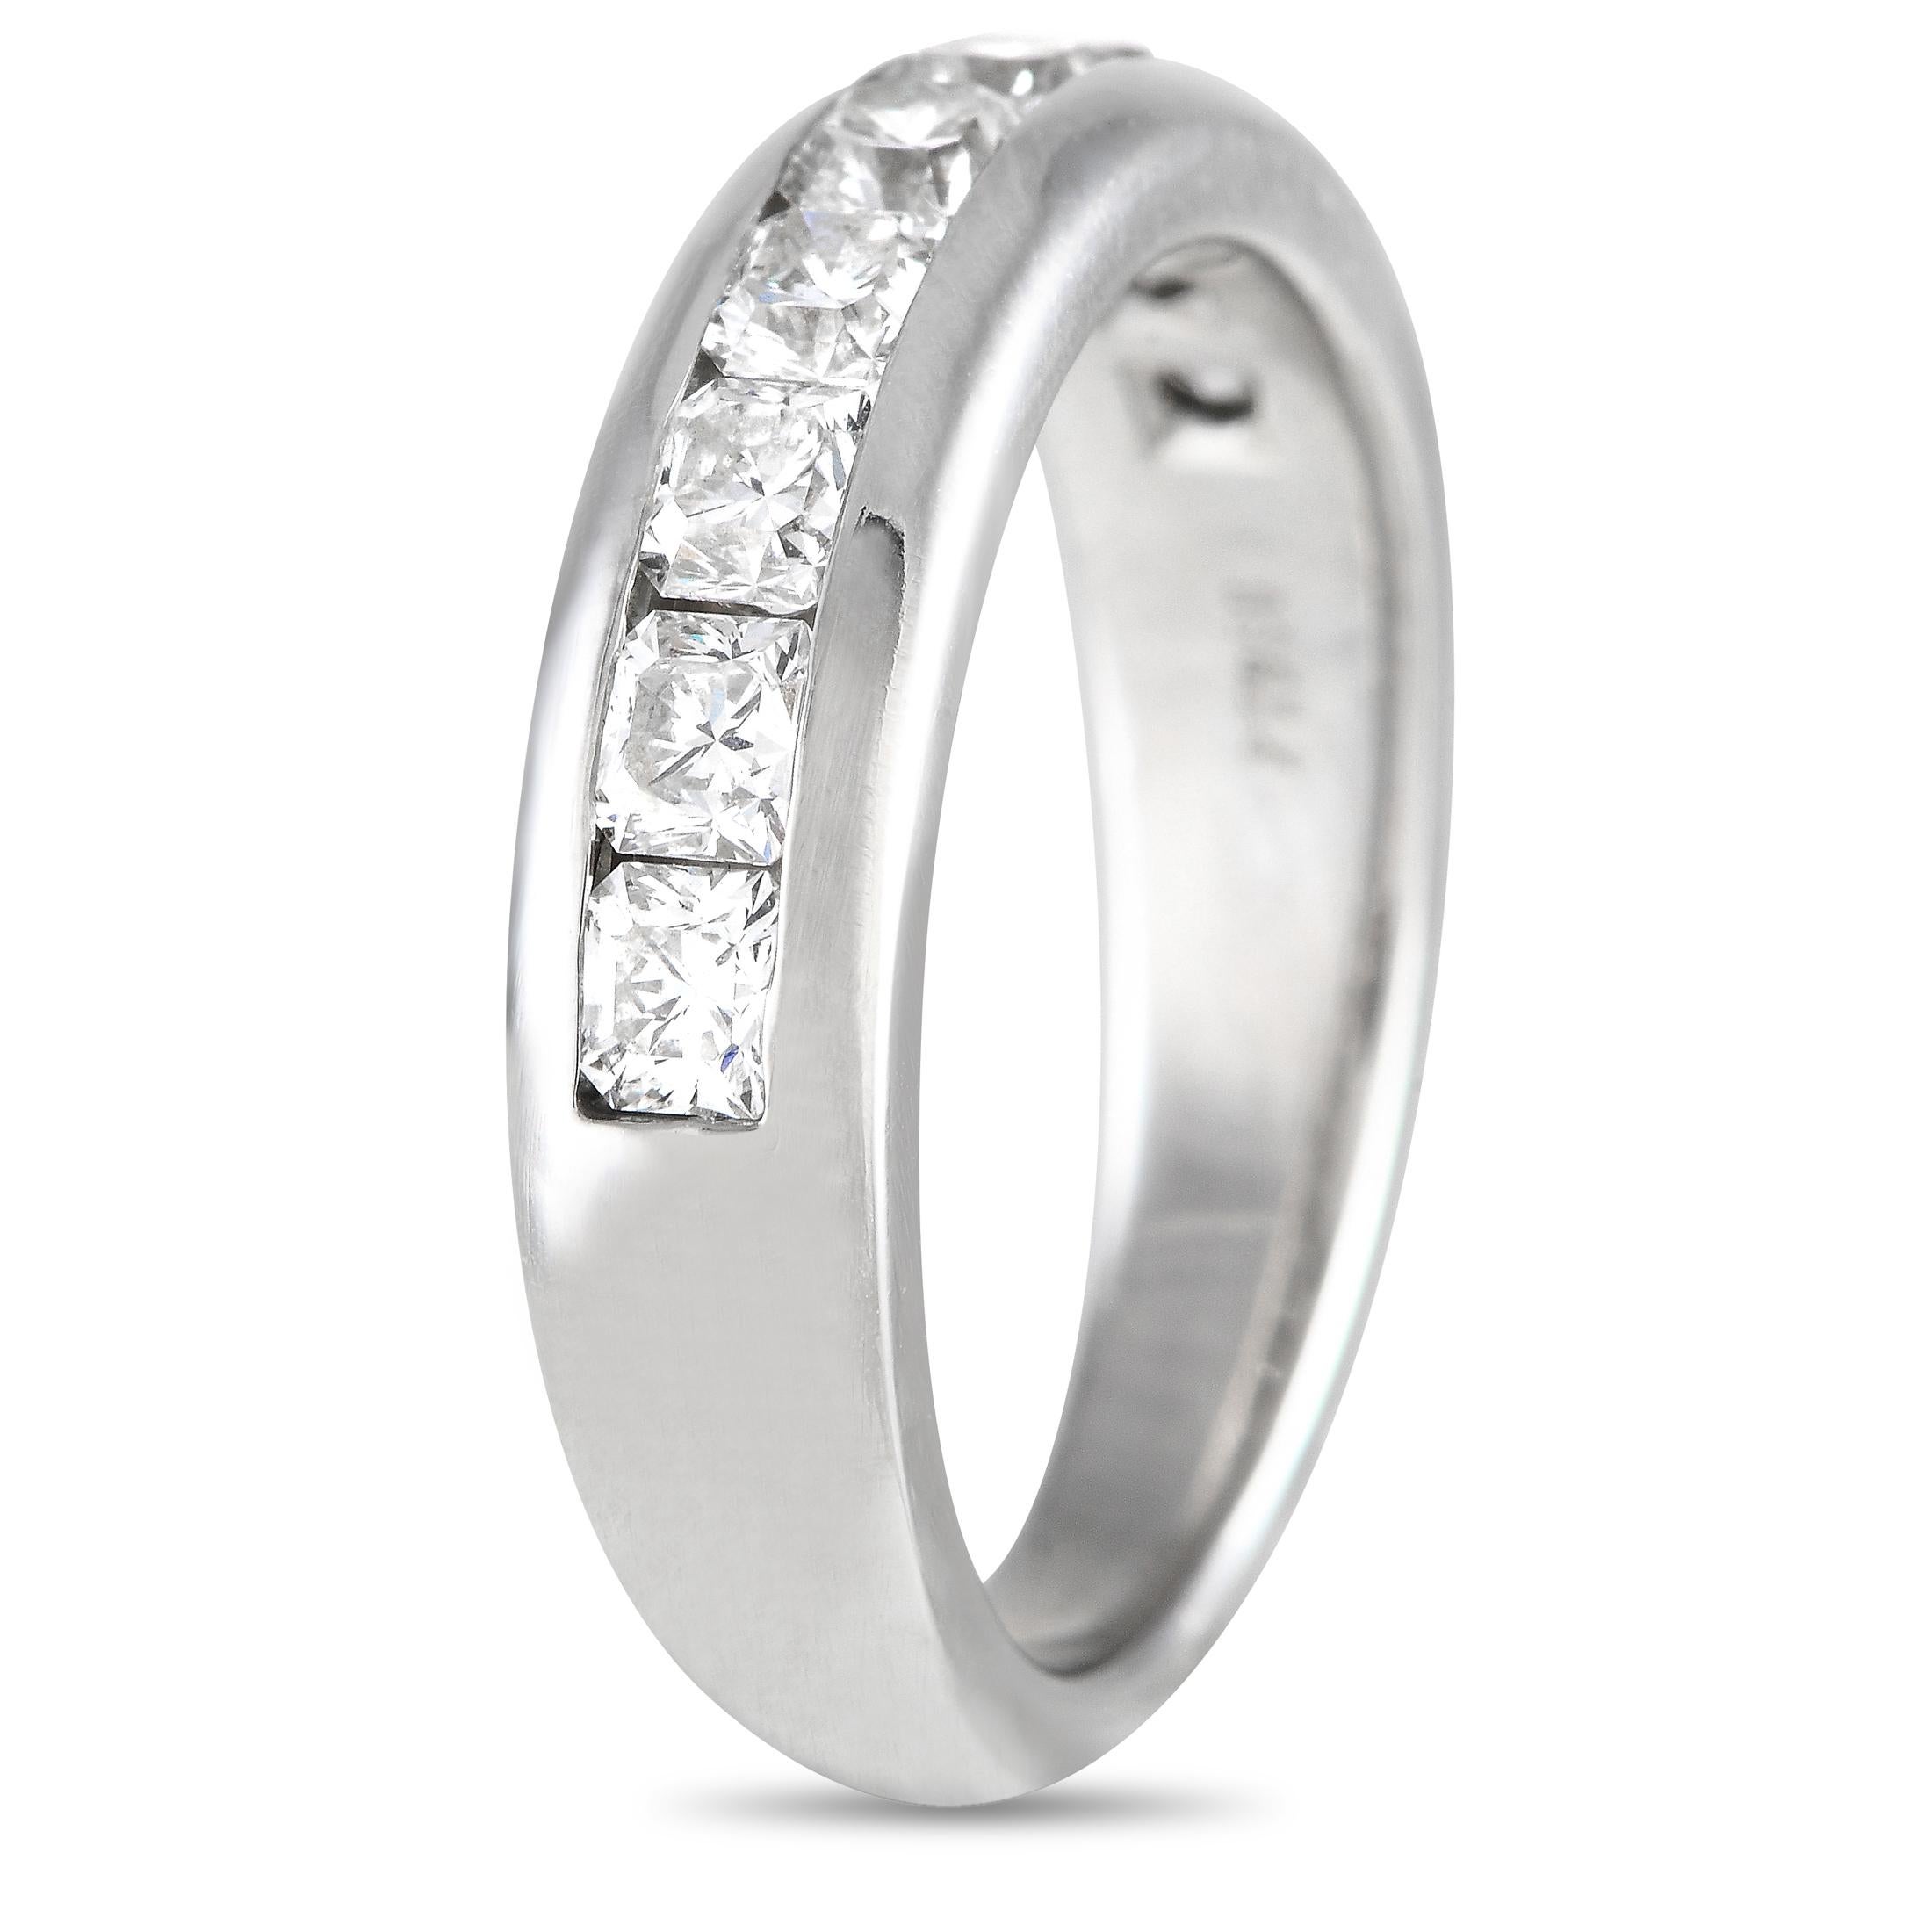 What makes this platinum wedding band so special is the unforgettable shine of the Tiffany-patented Lucida diamonds that trace half of its circumference. A creation by Tiffany & Co., this half-eternity ring features a stunning row of nine Lucida-cut